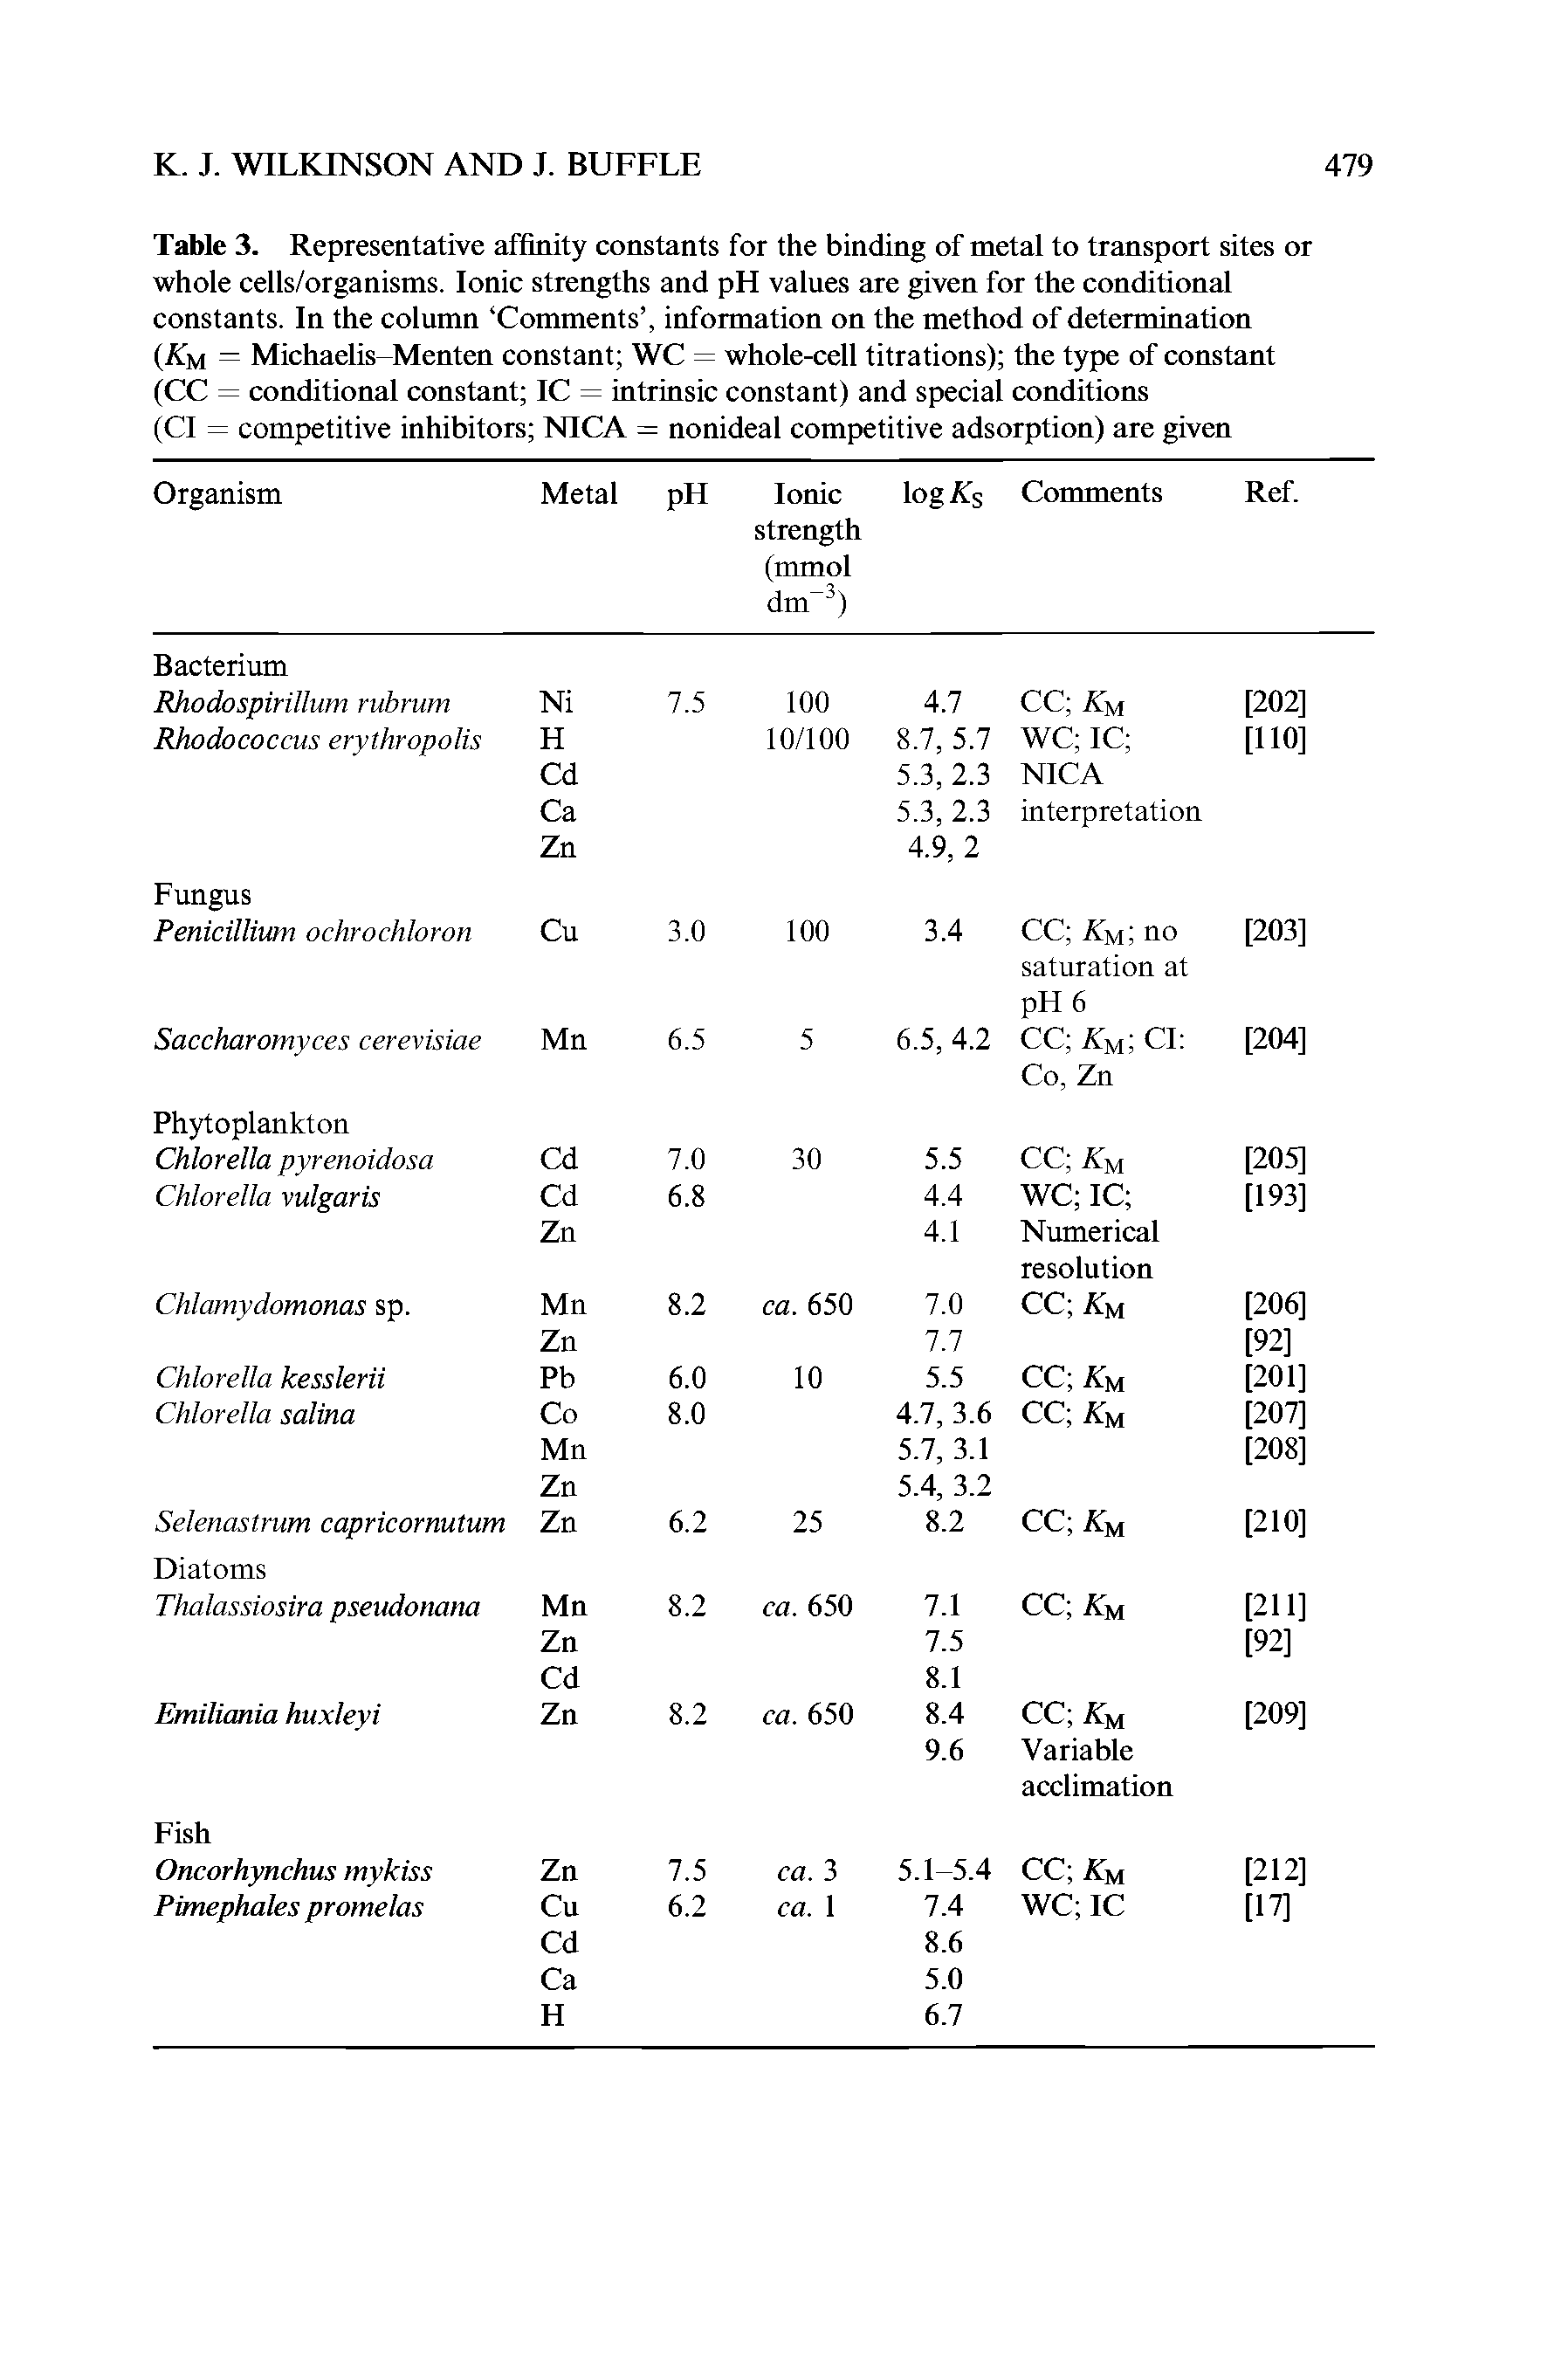 Table 3. Representative affinity constants for the binding of metal to transport sites or whole cells/organisms. Ionic strengths and pH values are given for the conditional constants. In the column Comments , information on the method of determination (Km = Michaelis-Menten constant WC = whole-cell titrations) the type of constant (CC = conditional constant IC = intrinsic constant) and special conditions (Cl = competitive inhibitors NICA = nonideal competitive adsorption) are given...